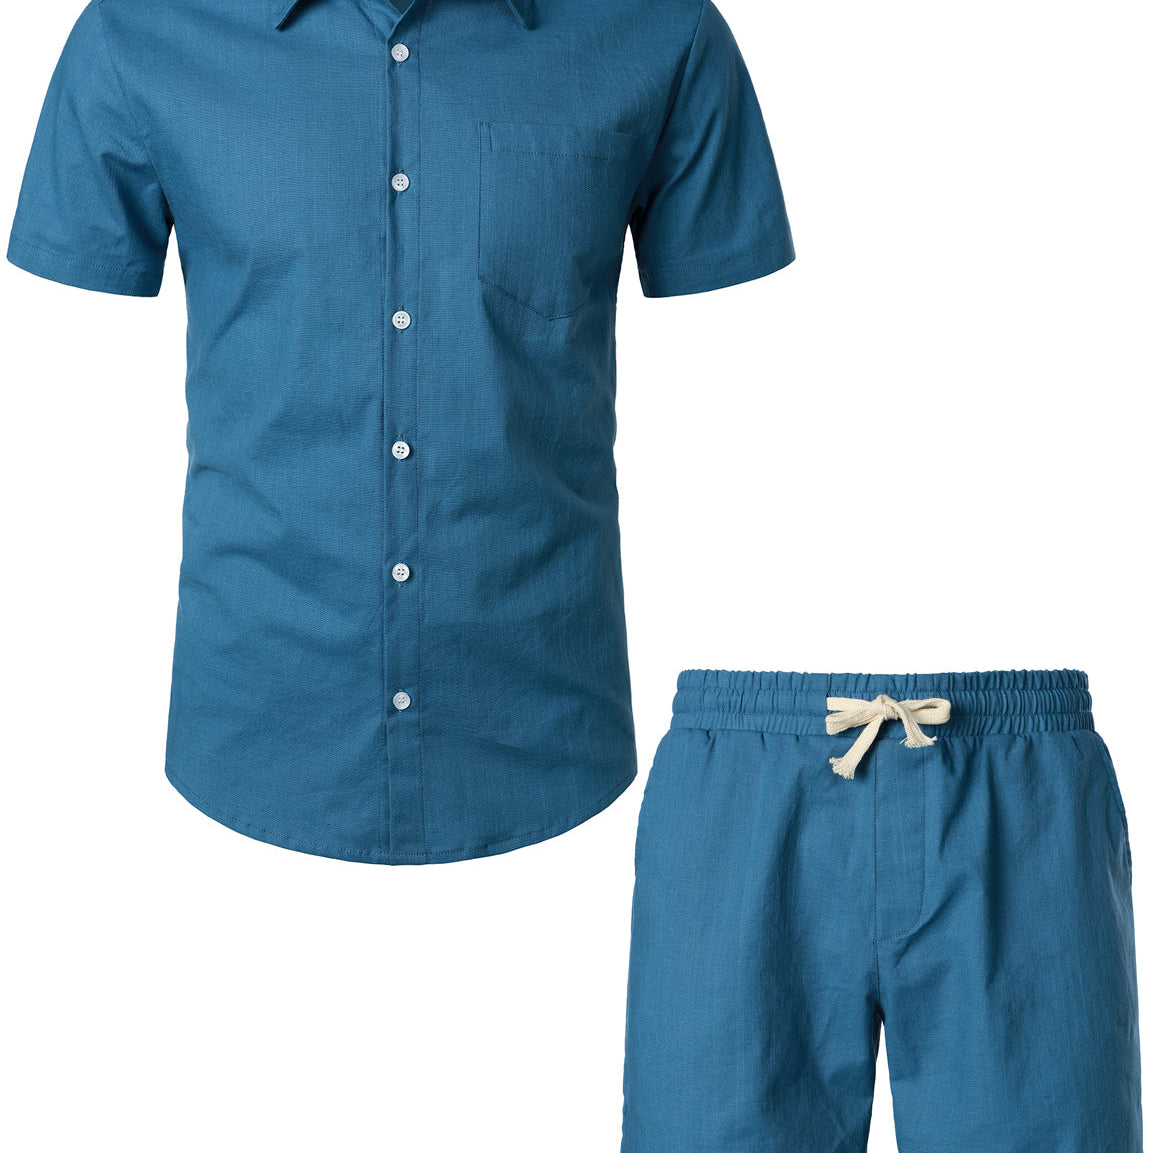 Men's Navy blue Solid Color Linen Cotton Outfit Pocket Short Sleeve Shirt and Shorts Set